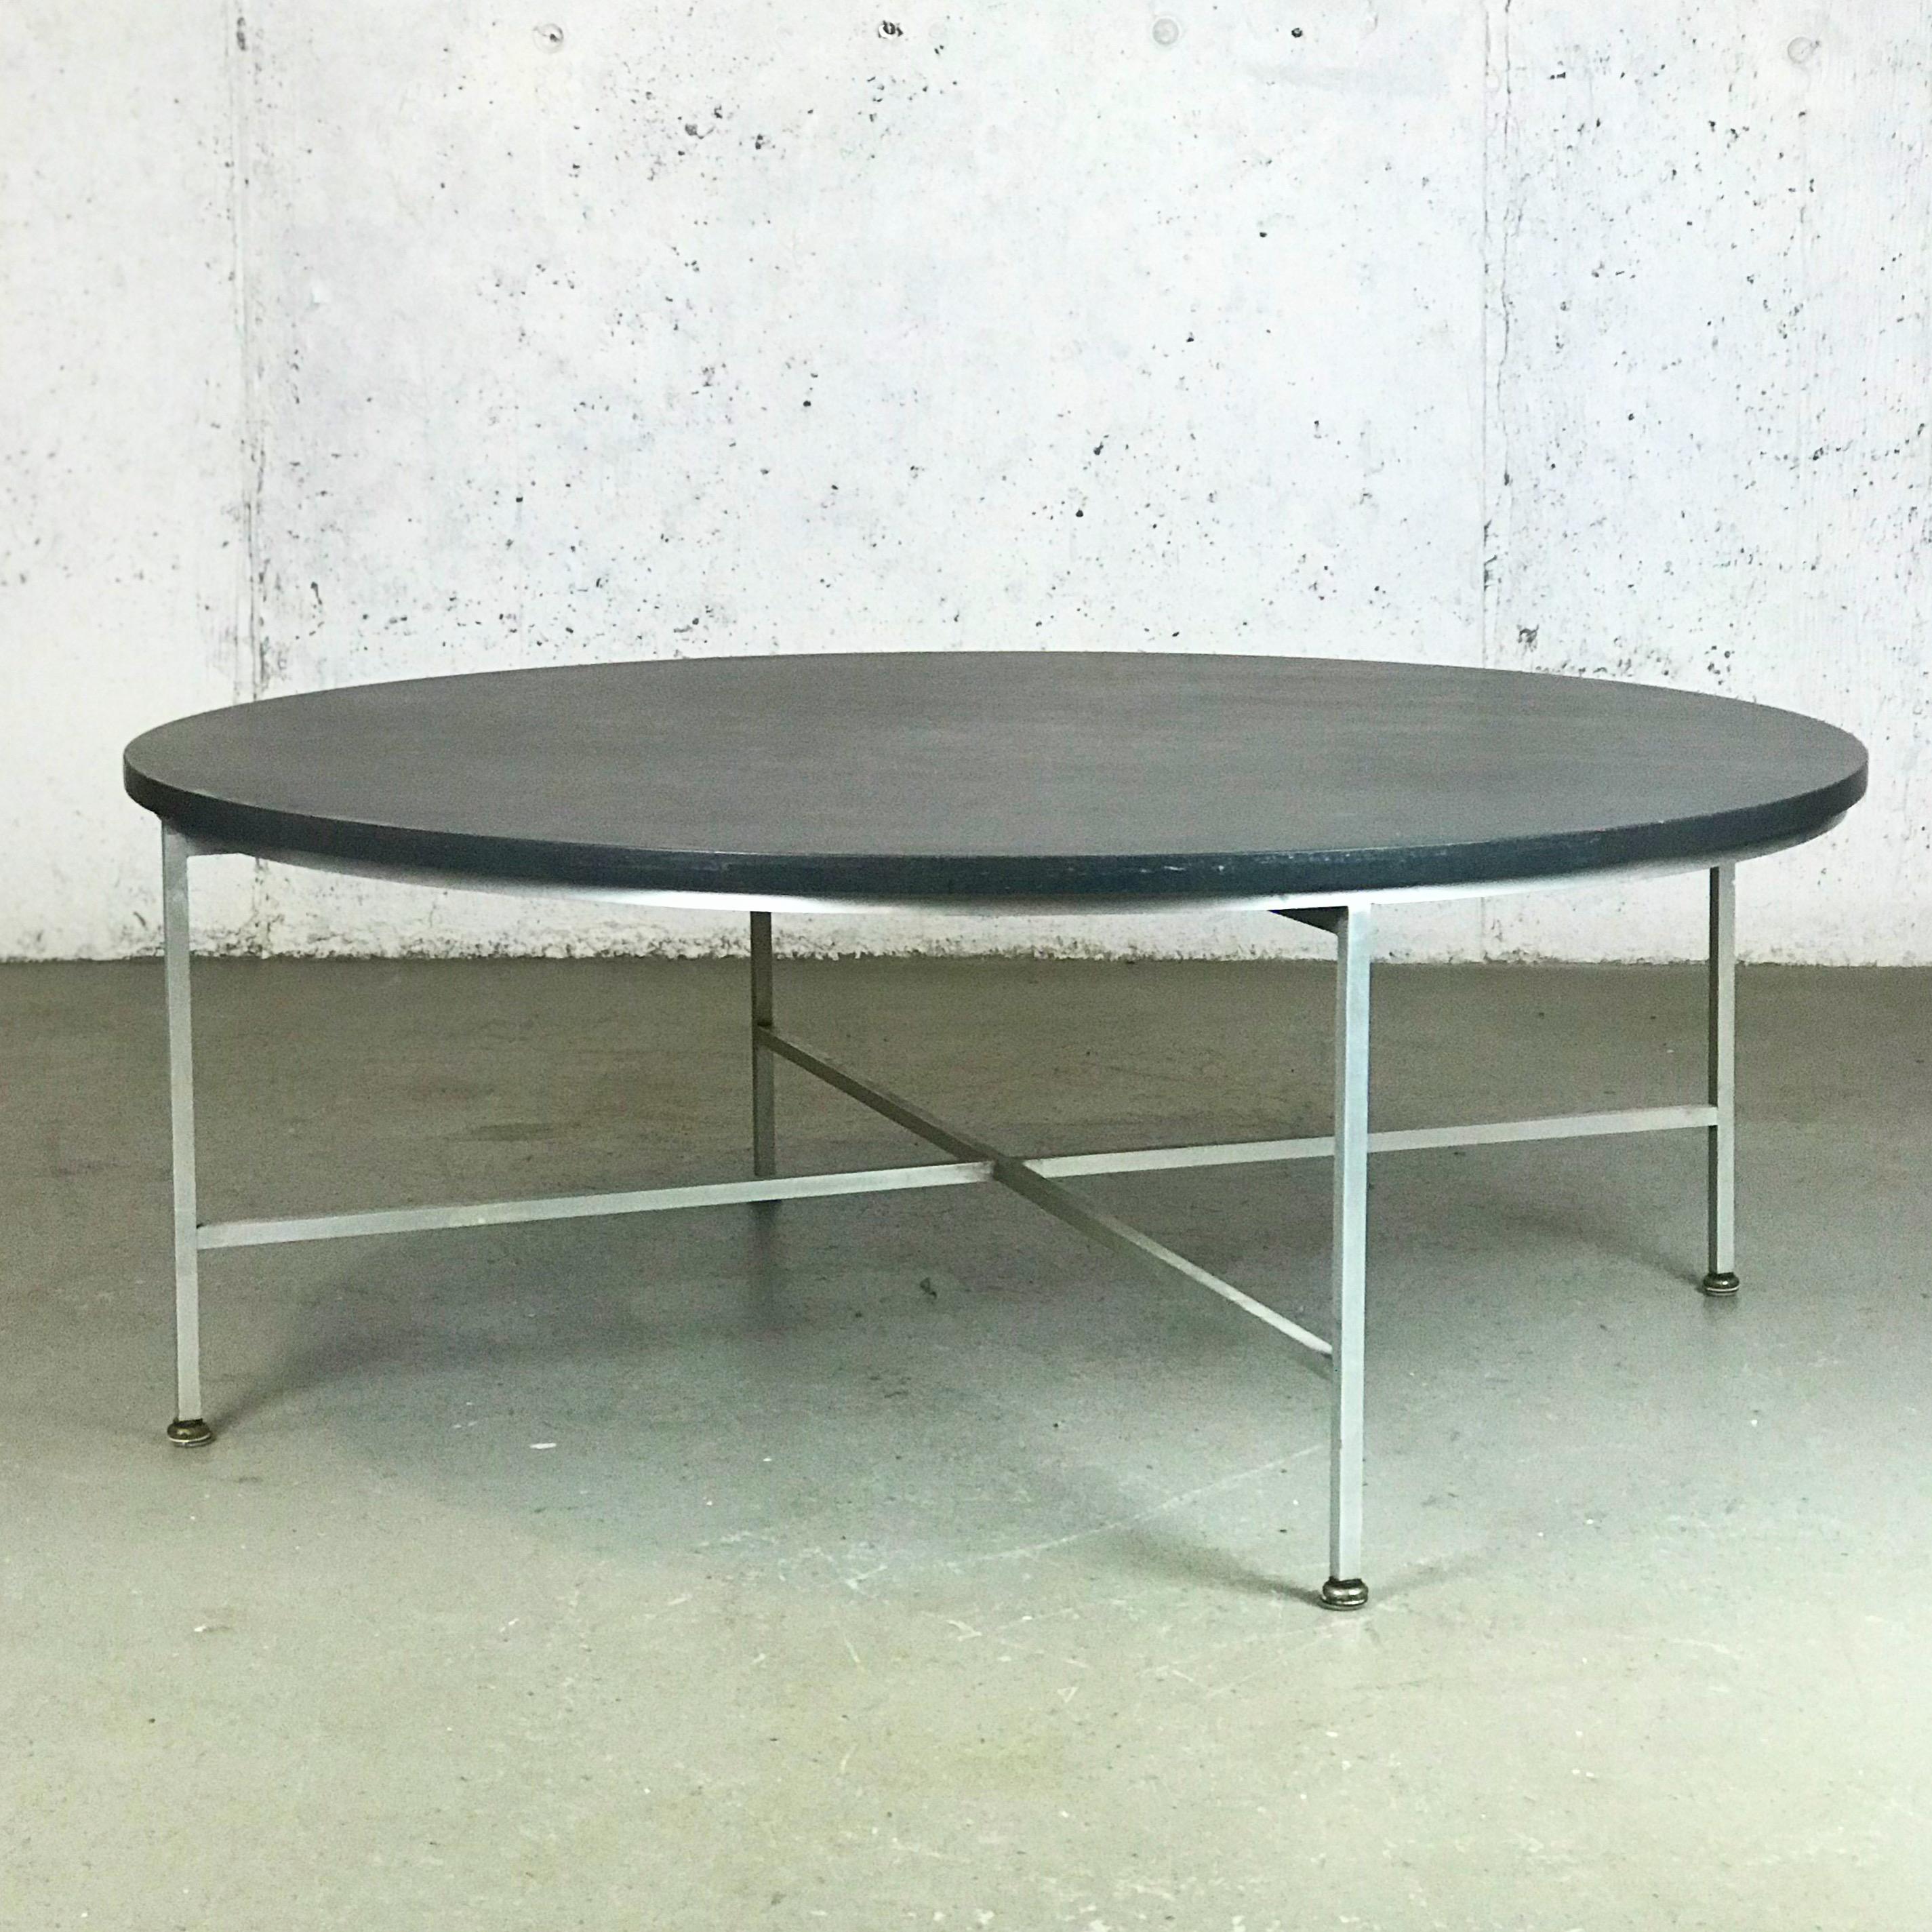 Aluminum frame Paul McCobb X-base coffee table for Directional; Calvin line. Very rare aluminum frame and slate top construction, 1950s. The aluminum base is in good shape - no bends and no tarnish/pitting - just minor nicks here and there. The